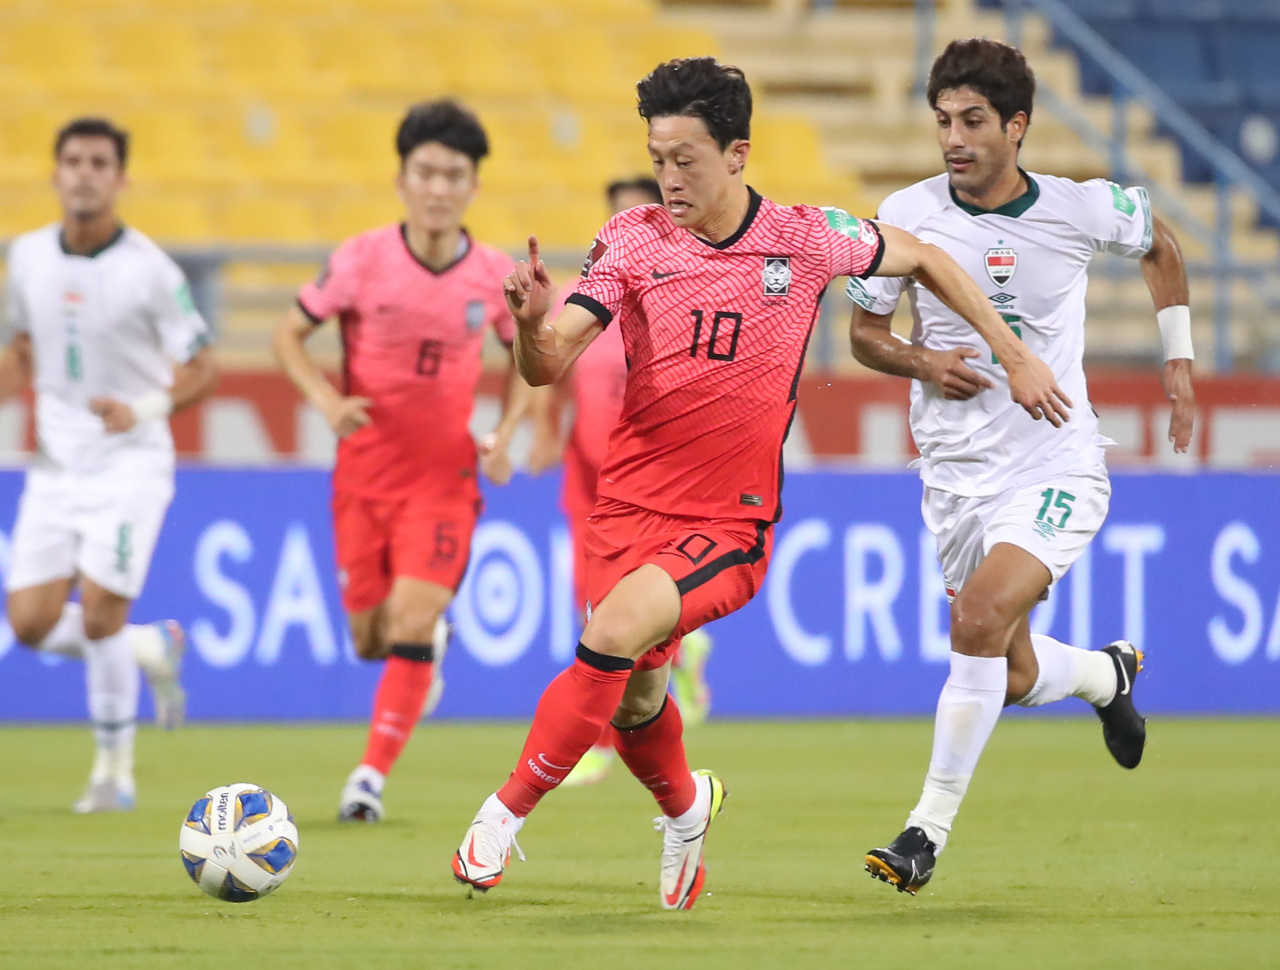 Lee Jae-sung of South Korea (L) dribbles past Mohammed Ali Abbood of Iraq during the teams' Group A match in the final Asian qualifying round for the 2022 FIFA World Cup at Thani bin Jassim Stadium in Doha on Tuesday. (Yonhap)